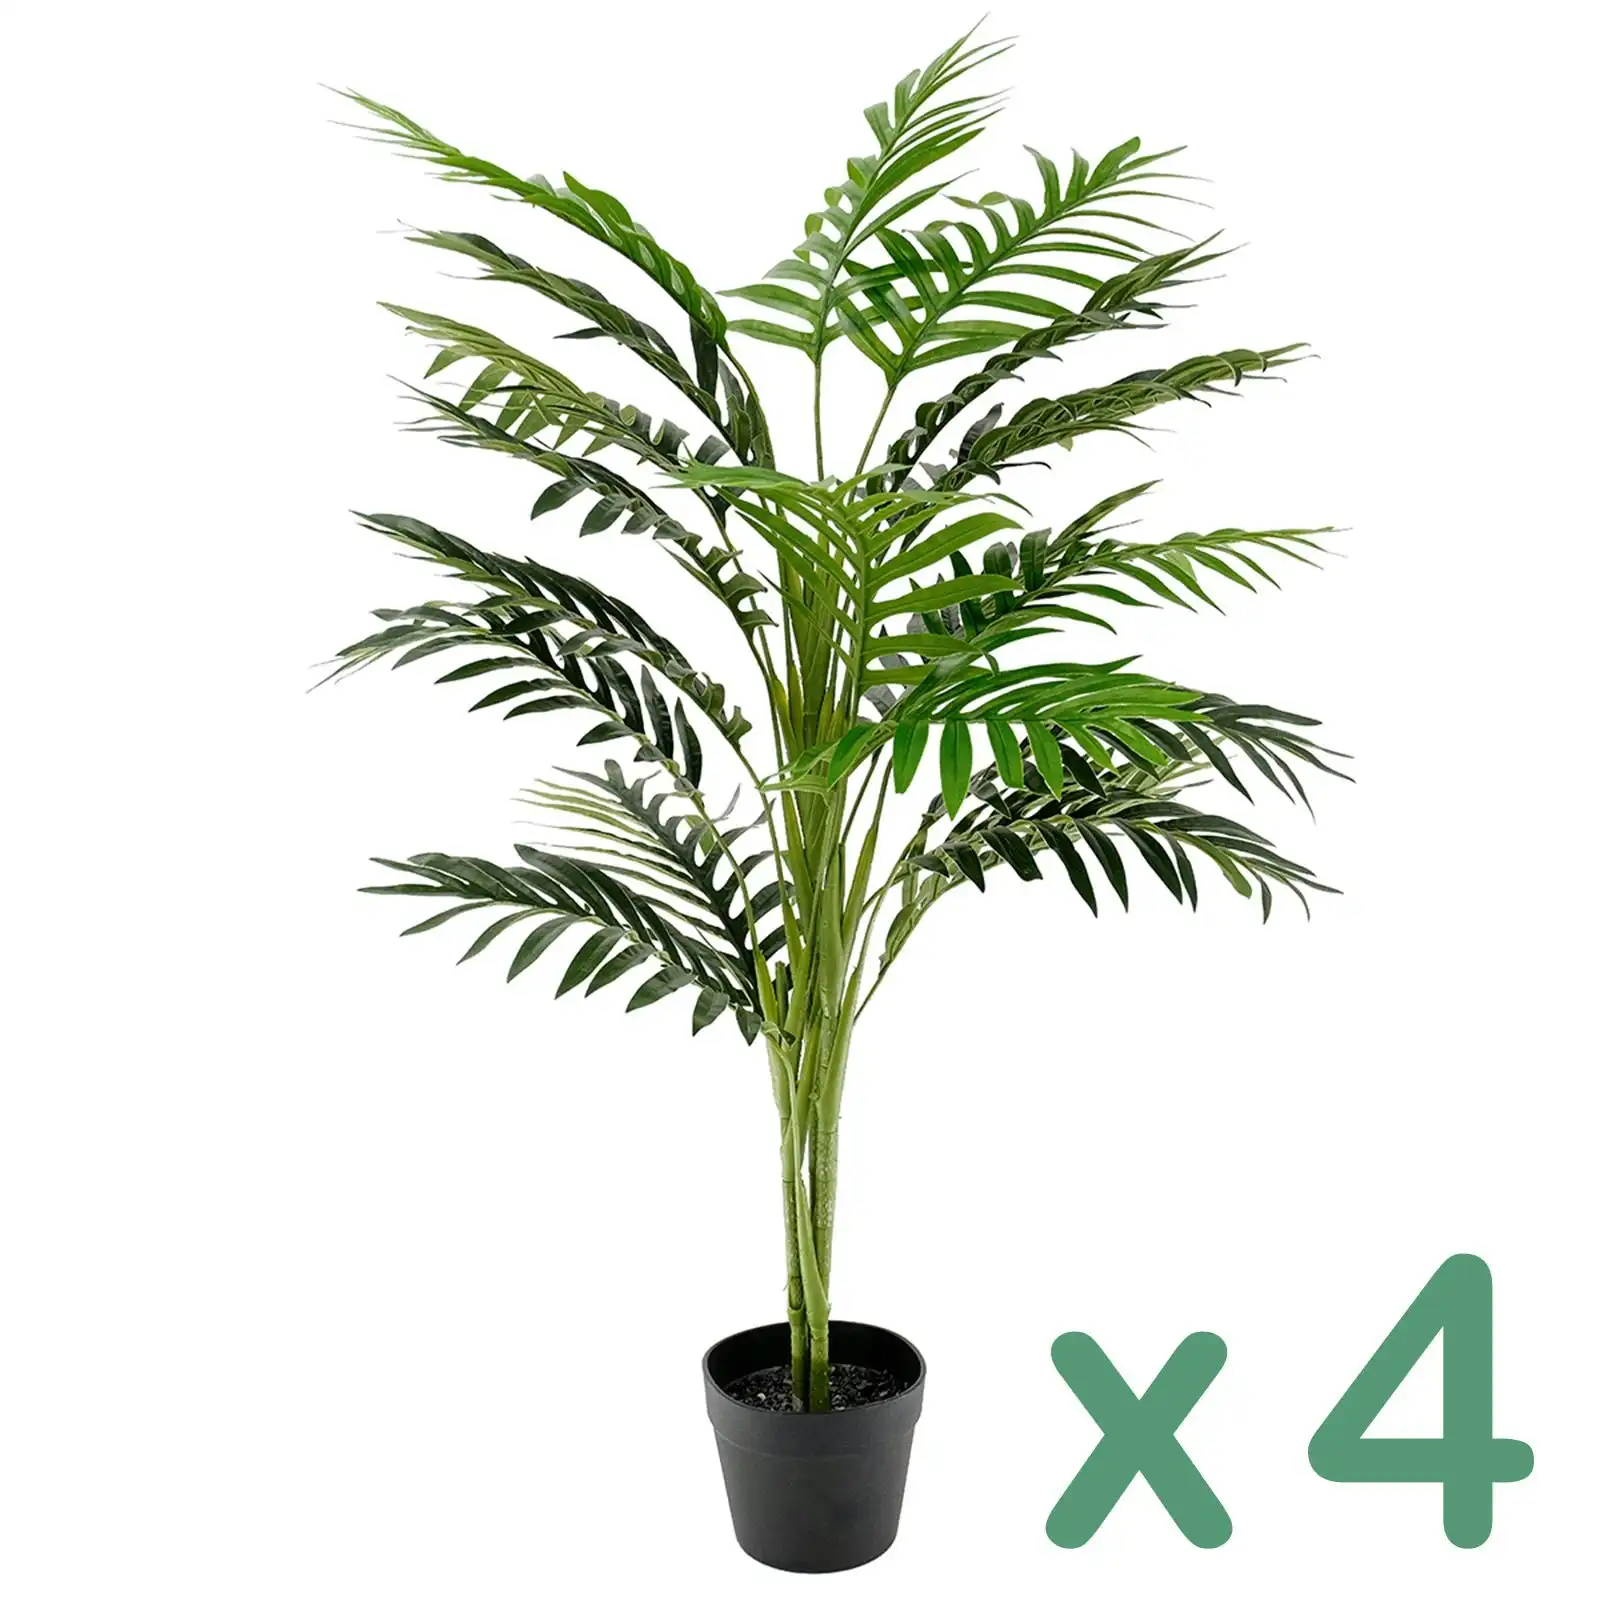 4 pots of Large Artificial Plants - UV treated Palm Trees 100cm